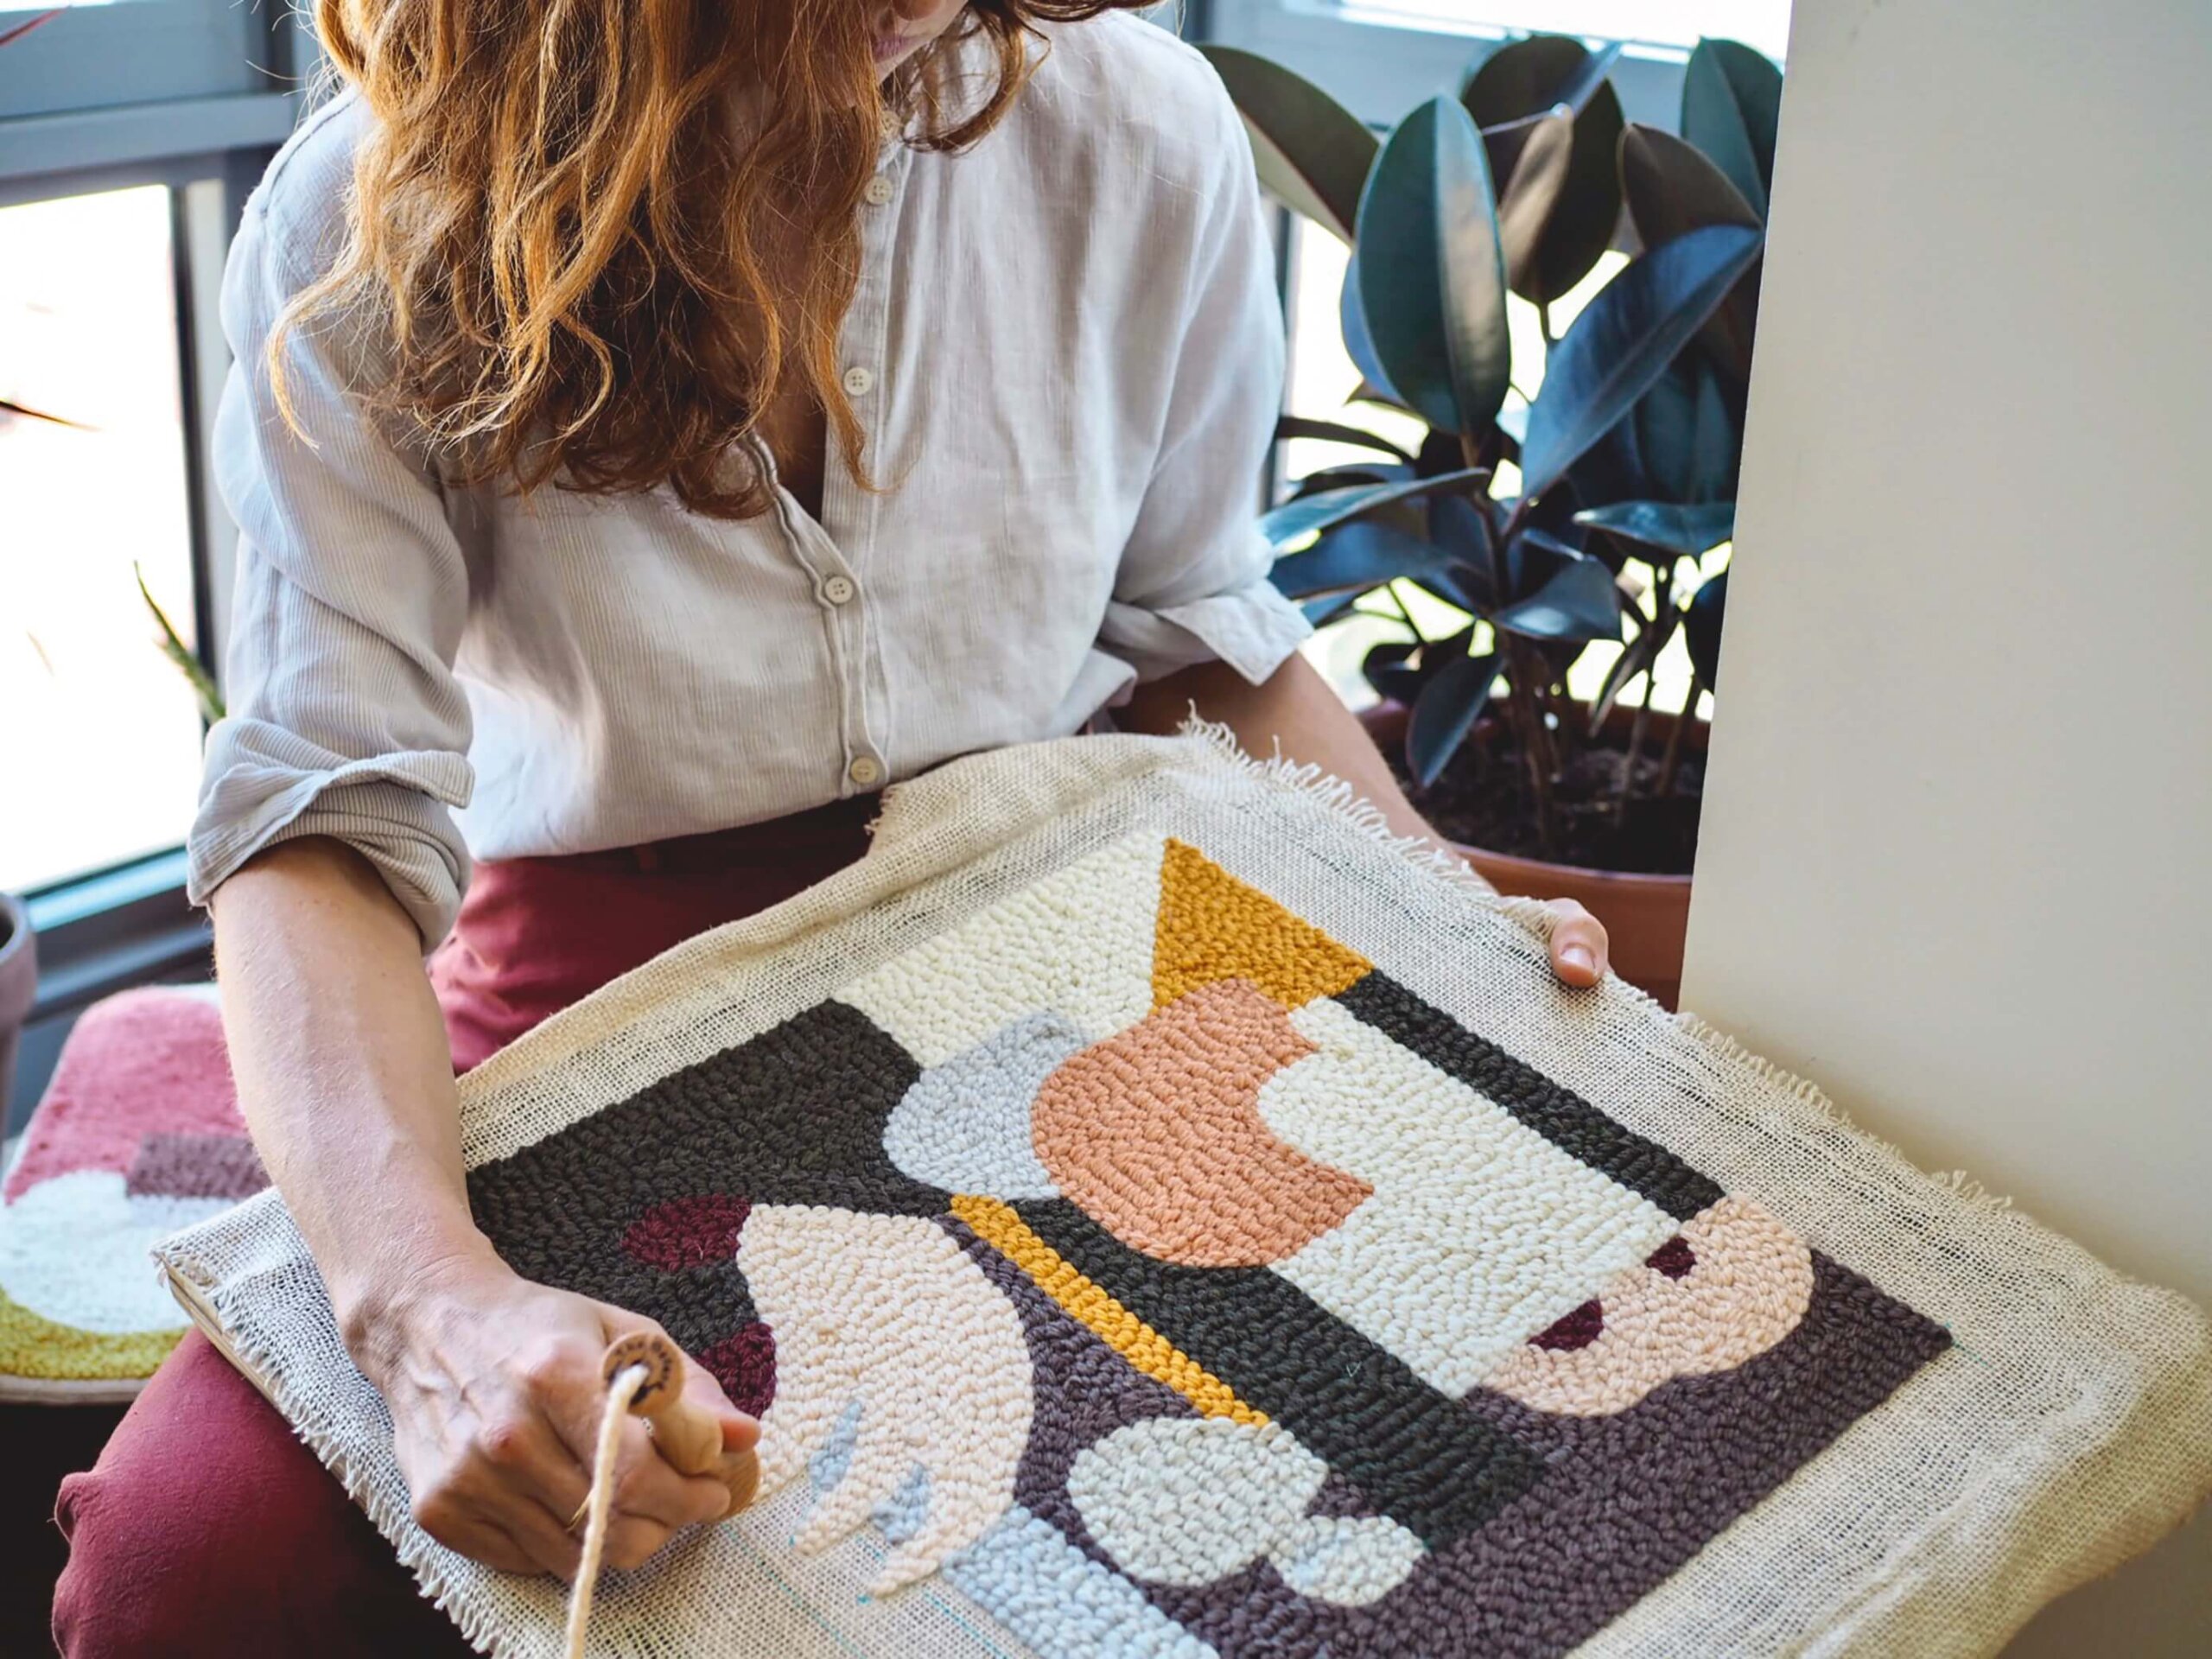 DIY Bath Mat from Modern Rug Hooking featured in Domino